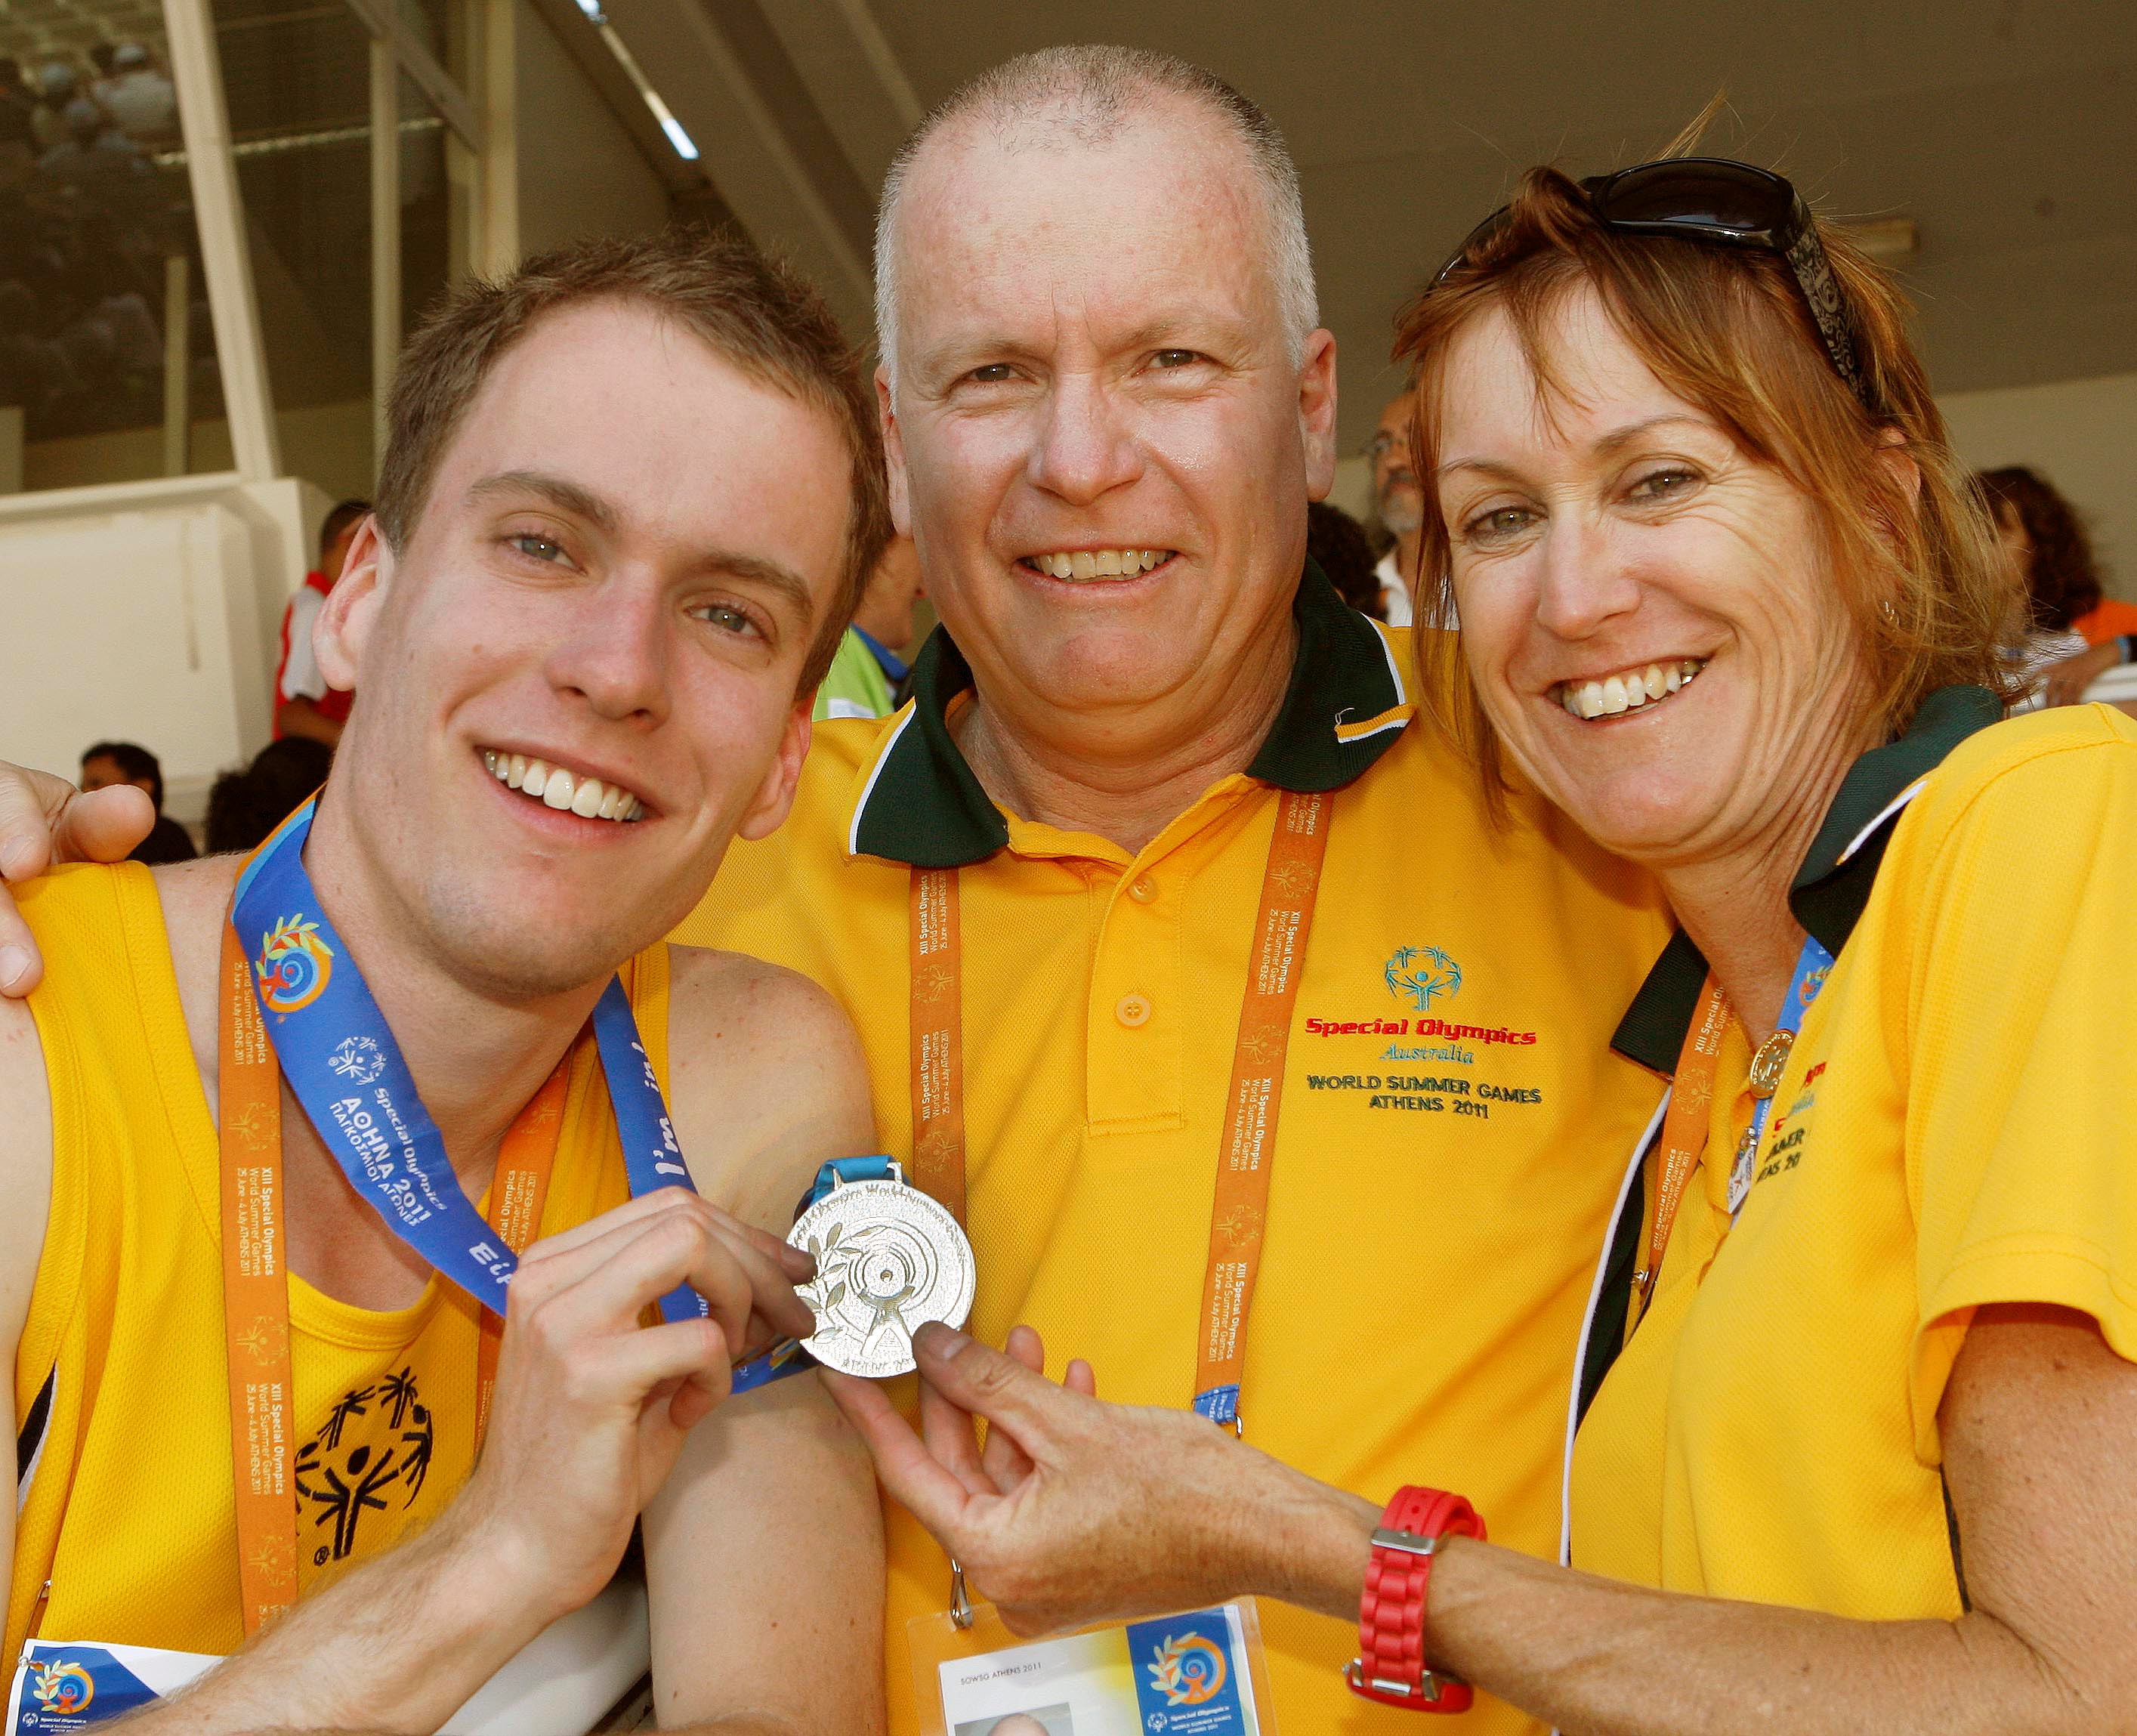 Matt Pascoe, left, displays his silver medal from the 2011 Special Olympics World Games in Athens with parents John and Tricia Pascoe. Photo courtesy of Special Olympics. 